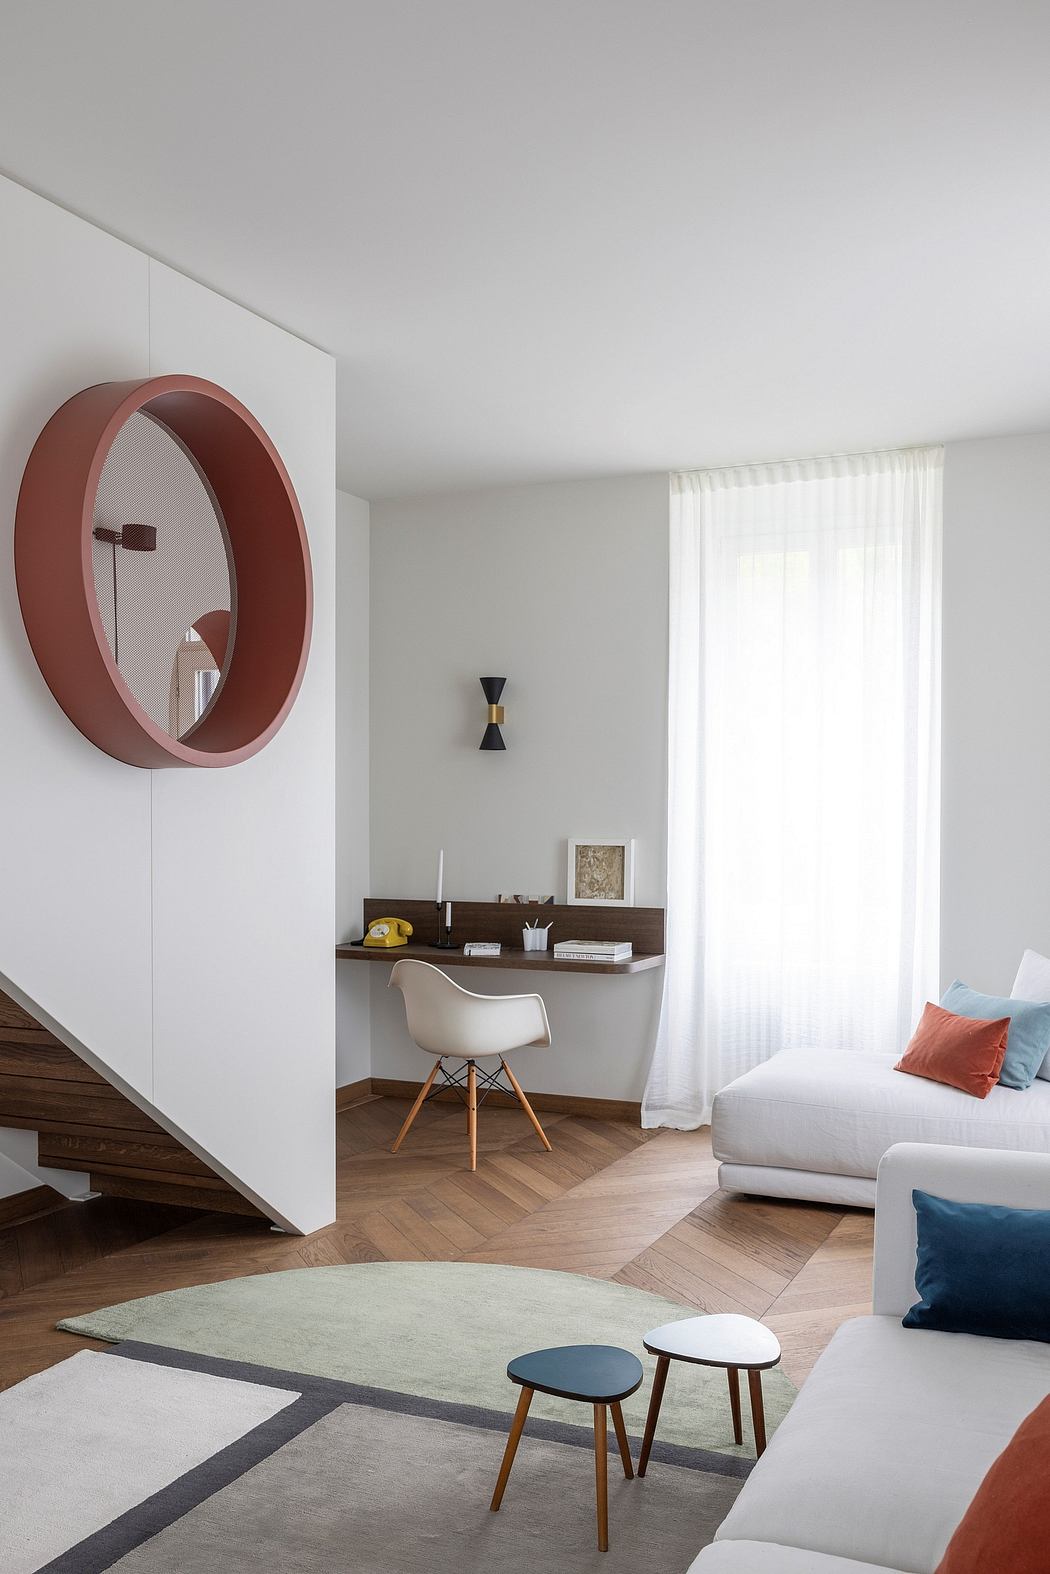 Minimalist living room with circular wall mirror, built-in desk, and wood floors.